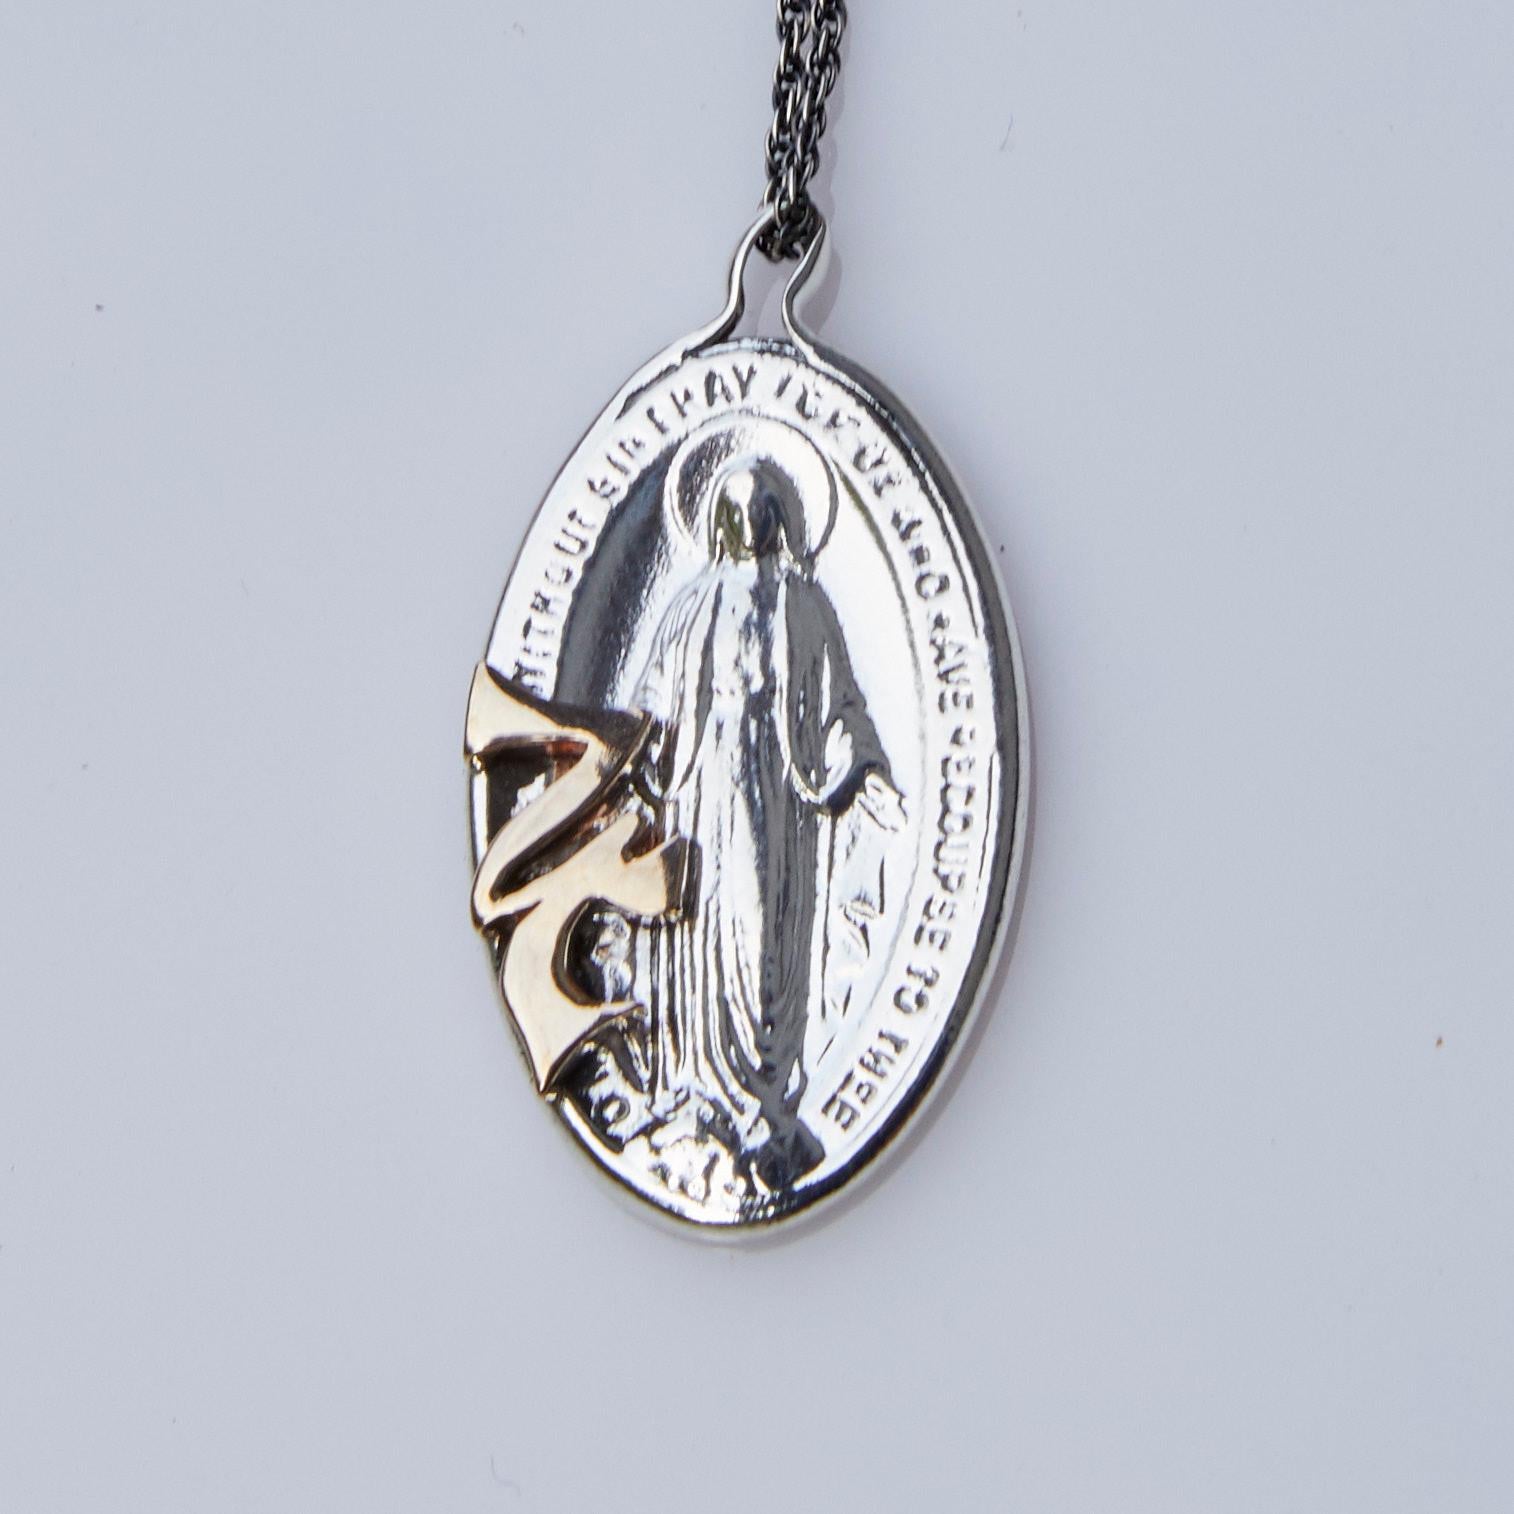 Miraculous Medal Oval Virgin Mary Jupiter Necklace Silver J DAUPHIN

J DAUPHIN Necklace Made in gold and silver 

The use of Medals and other sacred symbols can have several reason, some wear them as a sort of protection. Some wear saint medals as a